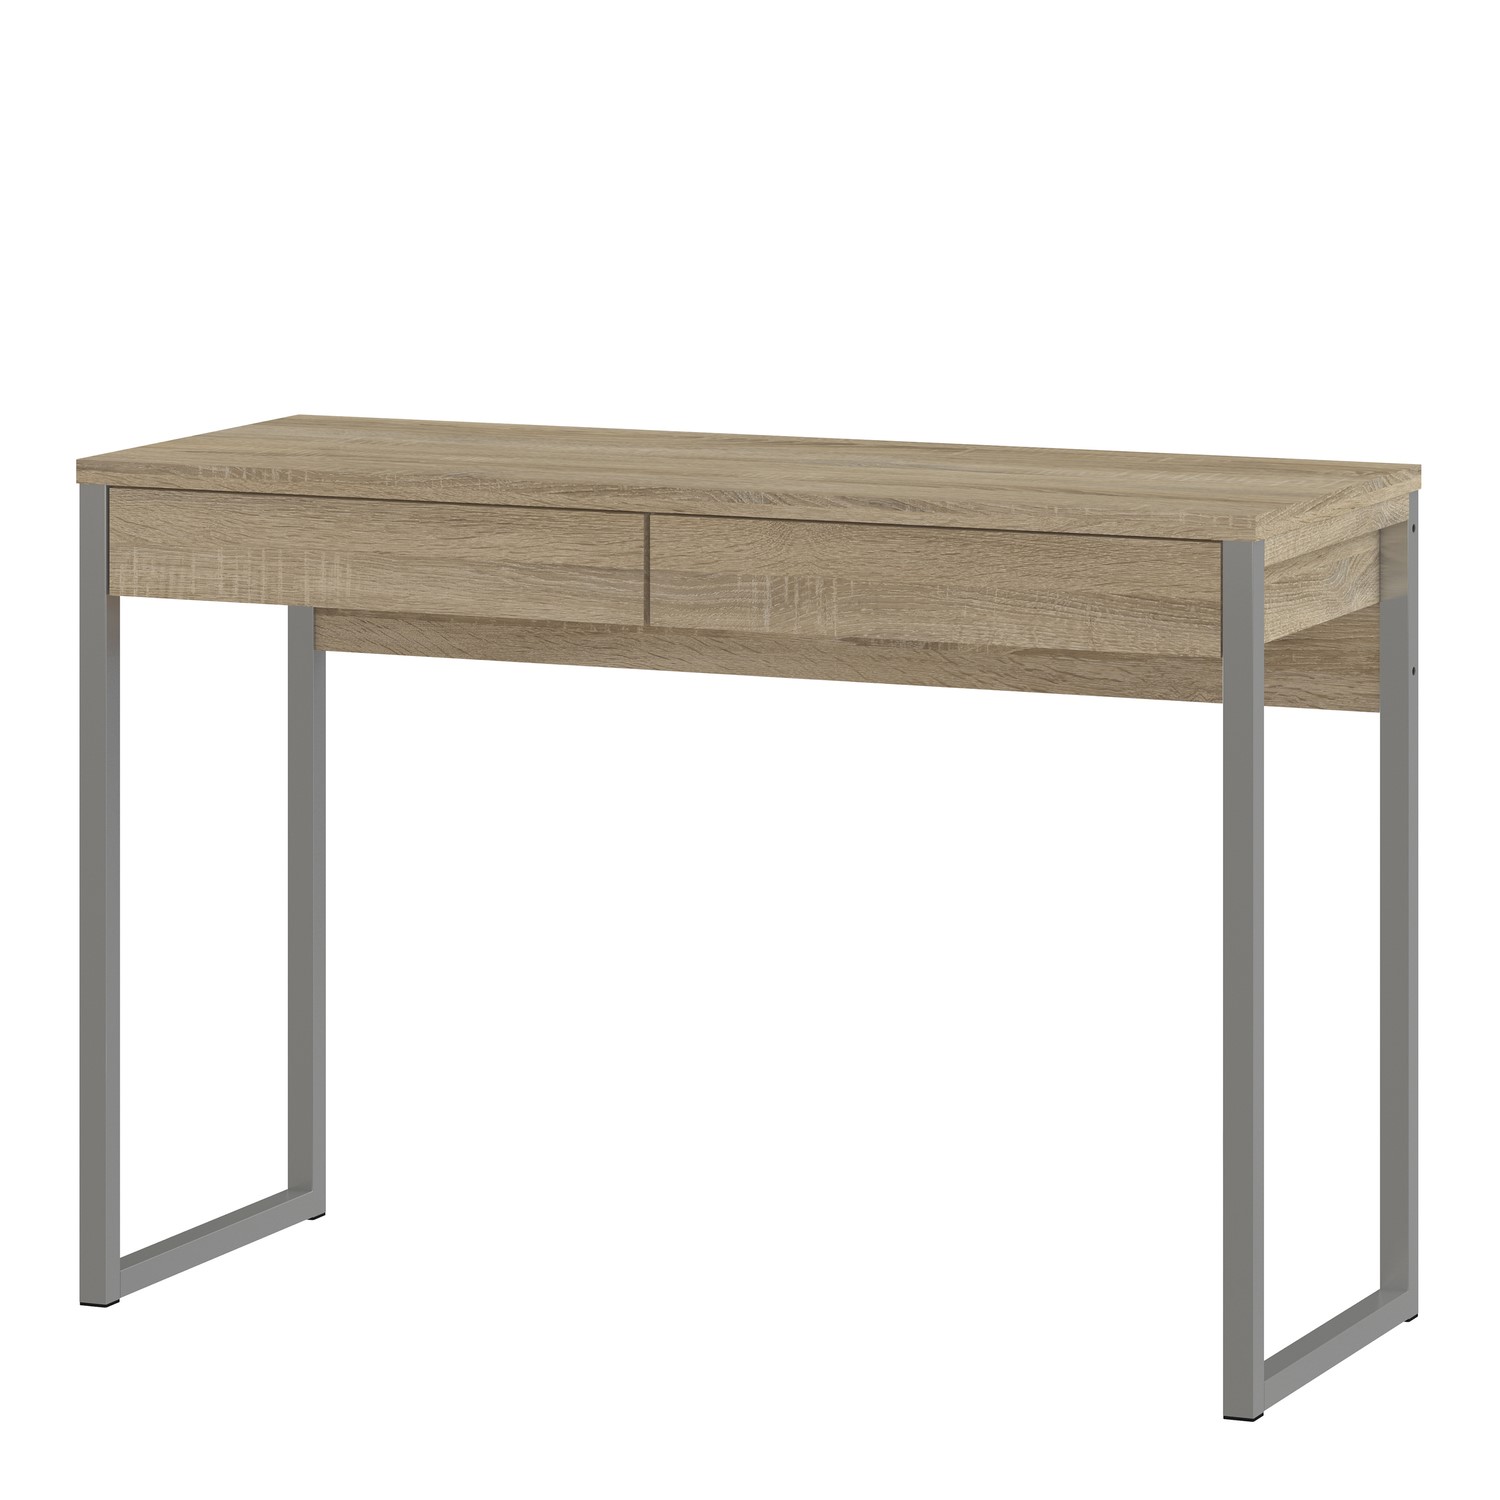 Read more about Small oak effect office desk with drawers function plus